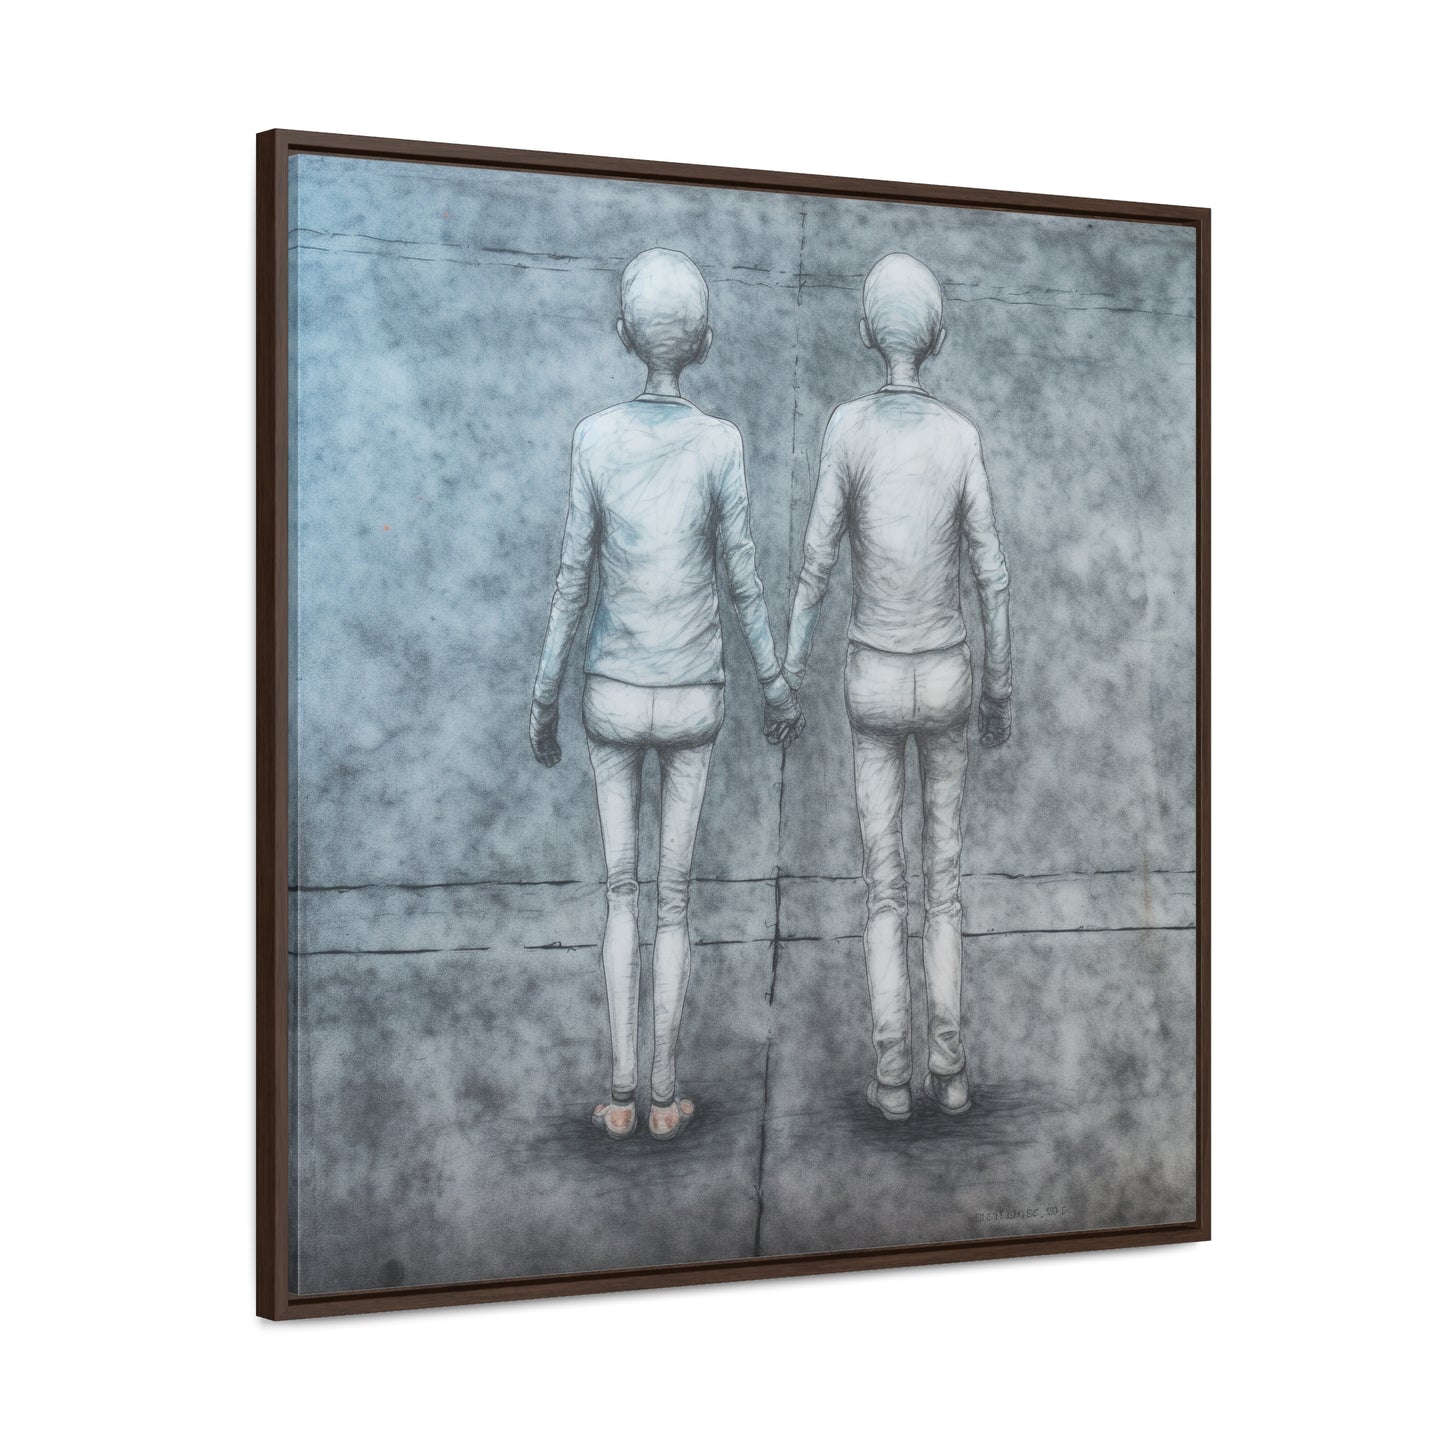 The Courage of Vulnerability 13, Valentinii, Gallery Canvas Wraps, Square Frame